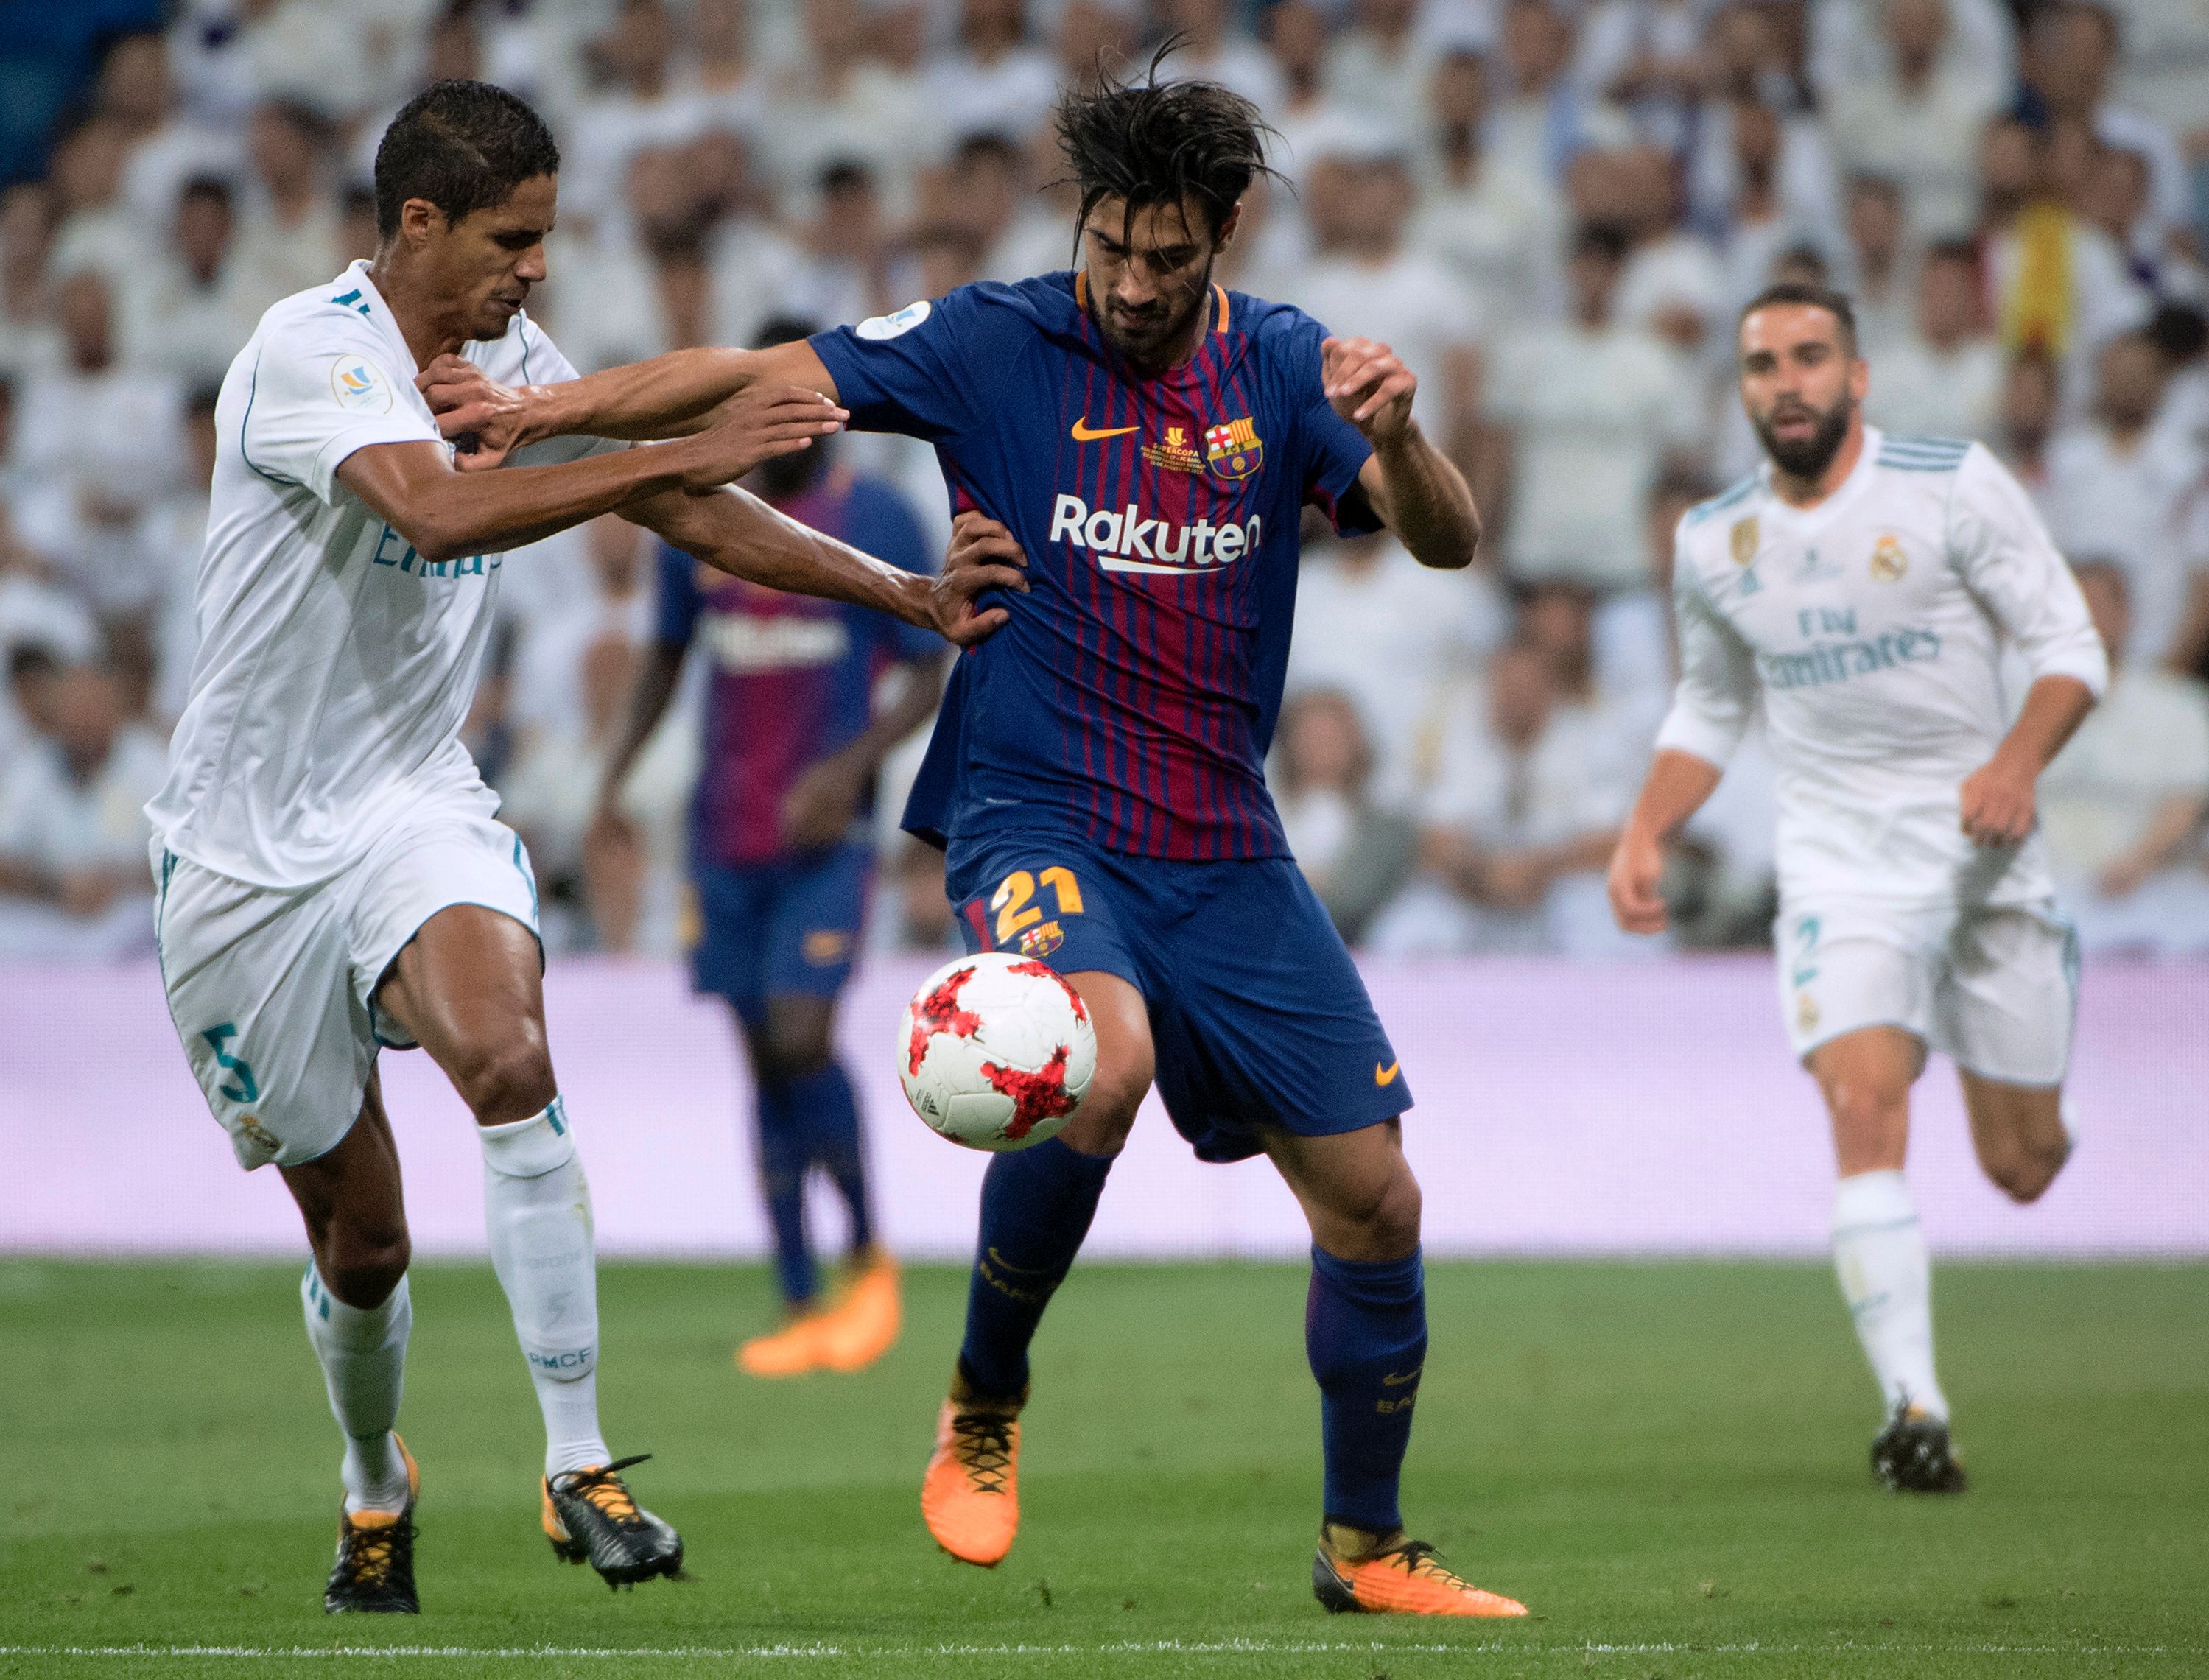 Real Madrid's French defender Raphael Varane (L) vies with Barcelona's Portuguese midfielder Andre Gomes during the second leg of the Spanish Supercup football match Real Madrid vs FC Barcelona at the Santiago Bernabeu stadium in Madrid, on August 16, 2017. / AFP PHOTO / CURTO DE LA TORRE        (Photo credit should read CURTO DE LA TORRE/AFP/Getty Images)